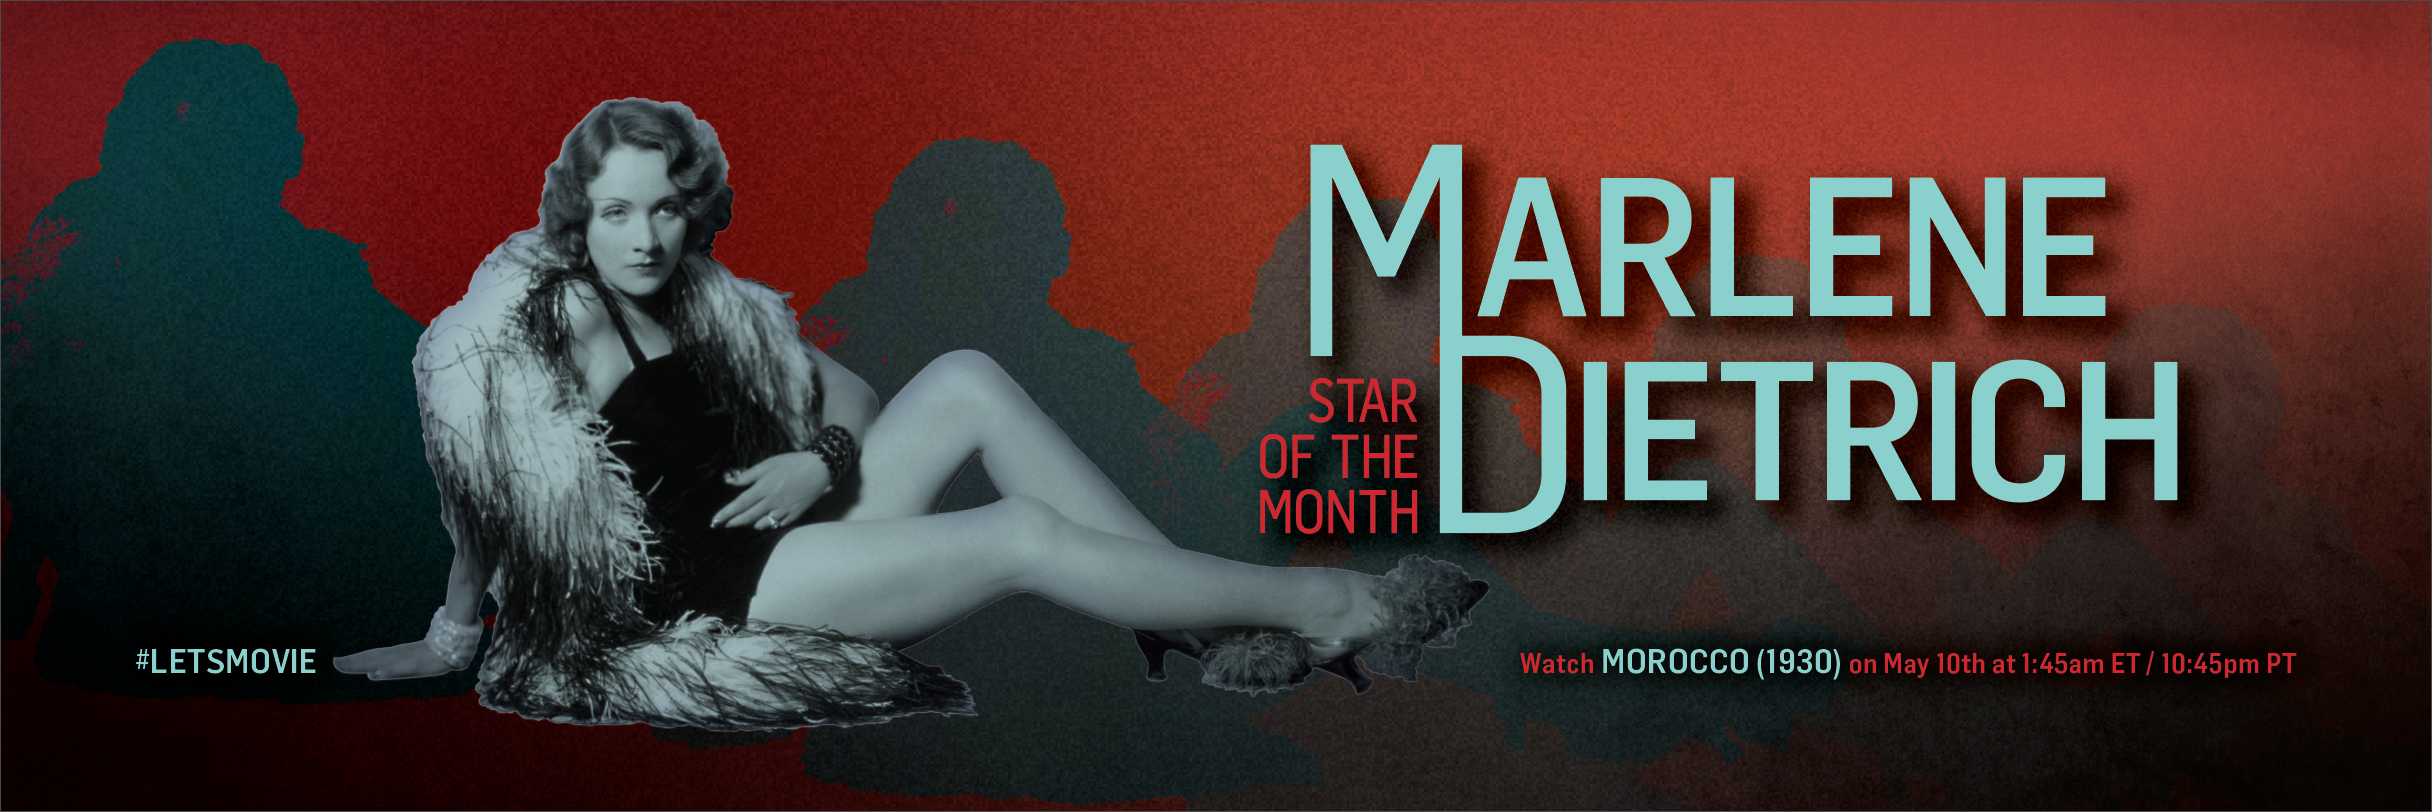 TCM_SocialCovers_18-05_SOTM-MarleneDietrich_Concepts_RD2-A.jpg